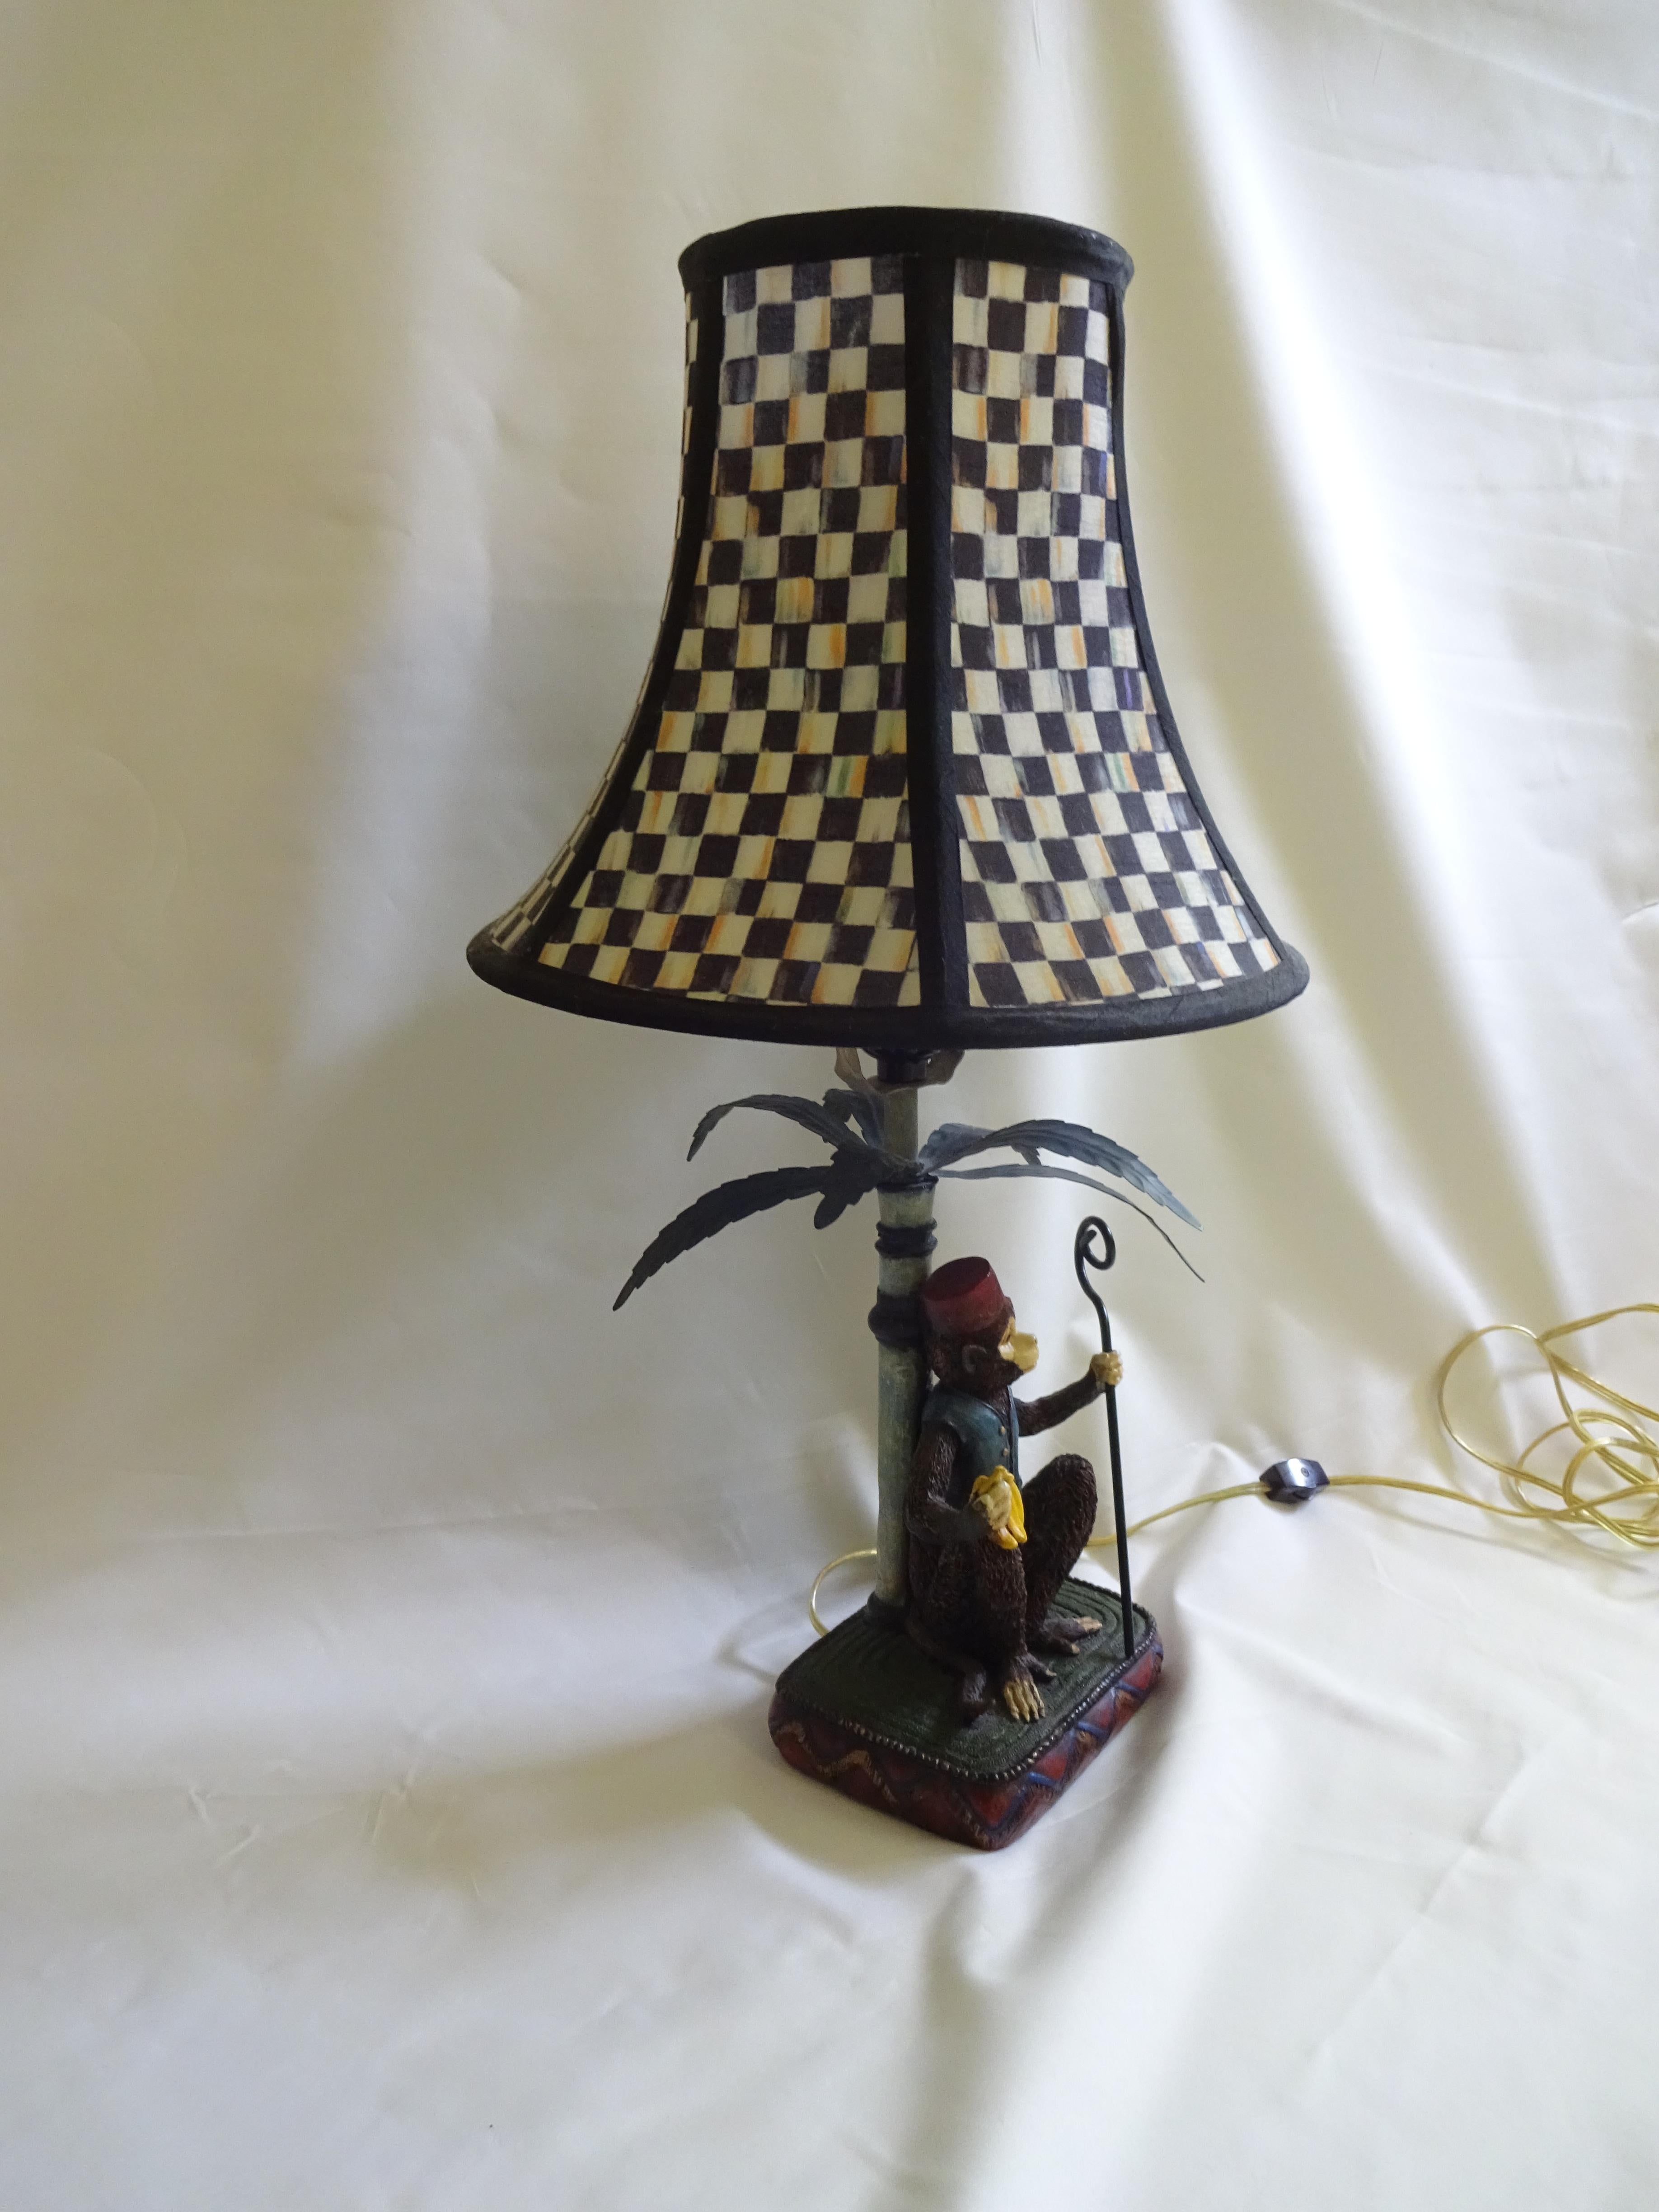 Original Mackenzie Childs table lamp with a monkey base, hand painted
Lampshade design: original courtly check
Excellent condition,
No break, no crack, no scratch, shade in perfect condition too.
Multi-color
Theme: Animal
Connection: Electric